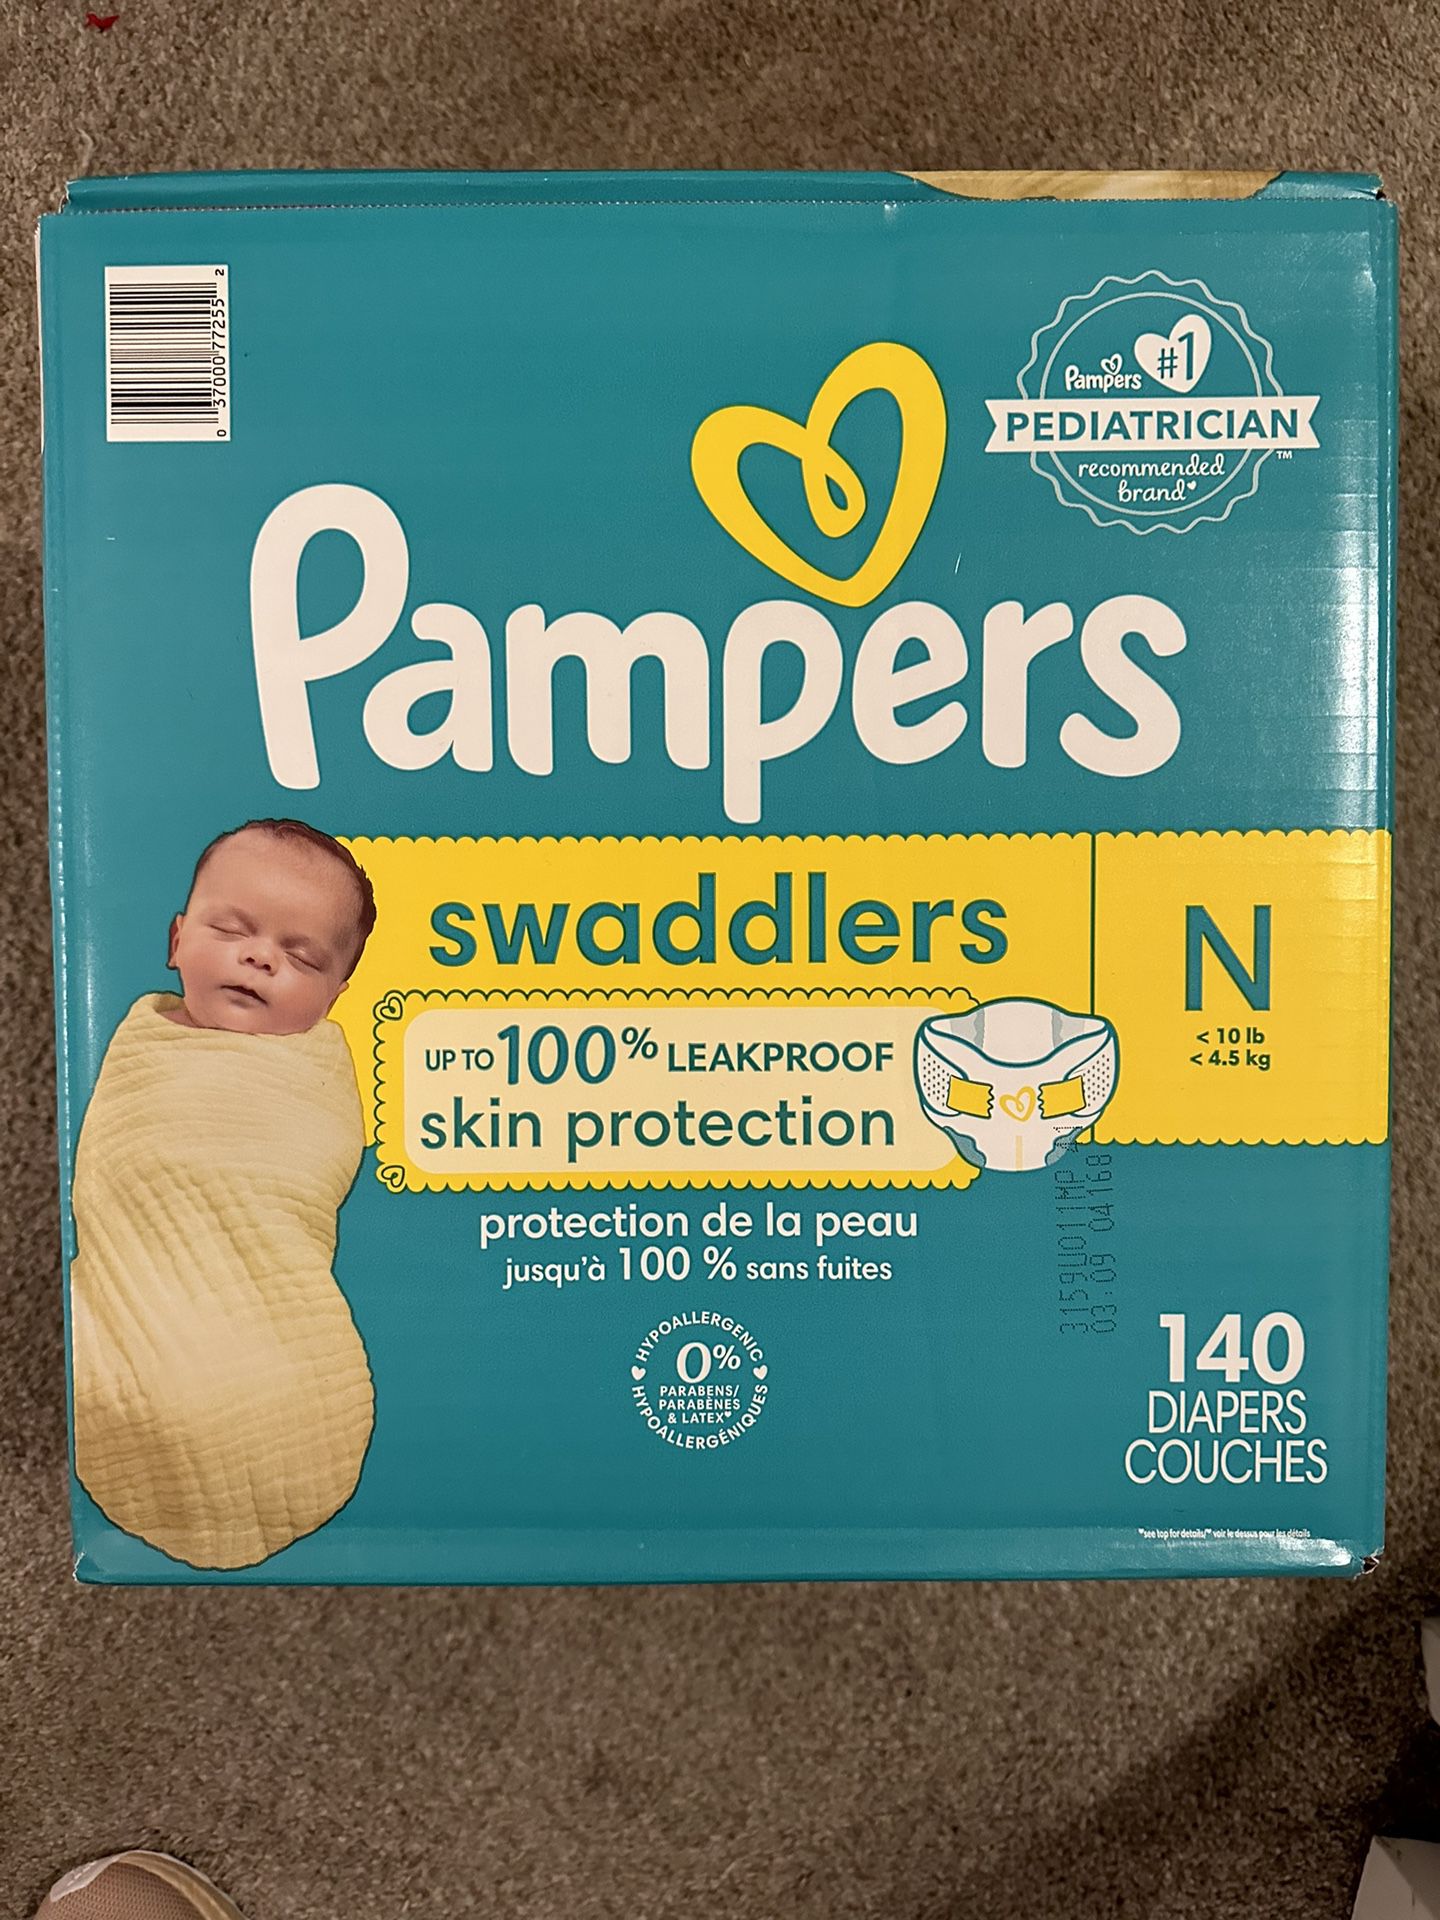 Pampers Swaddlers Newborn 140 count